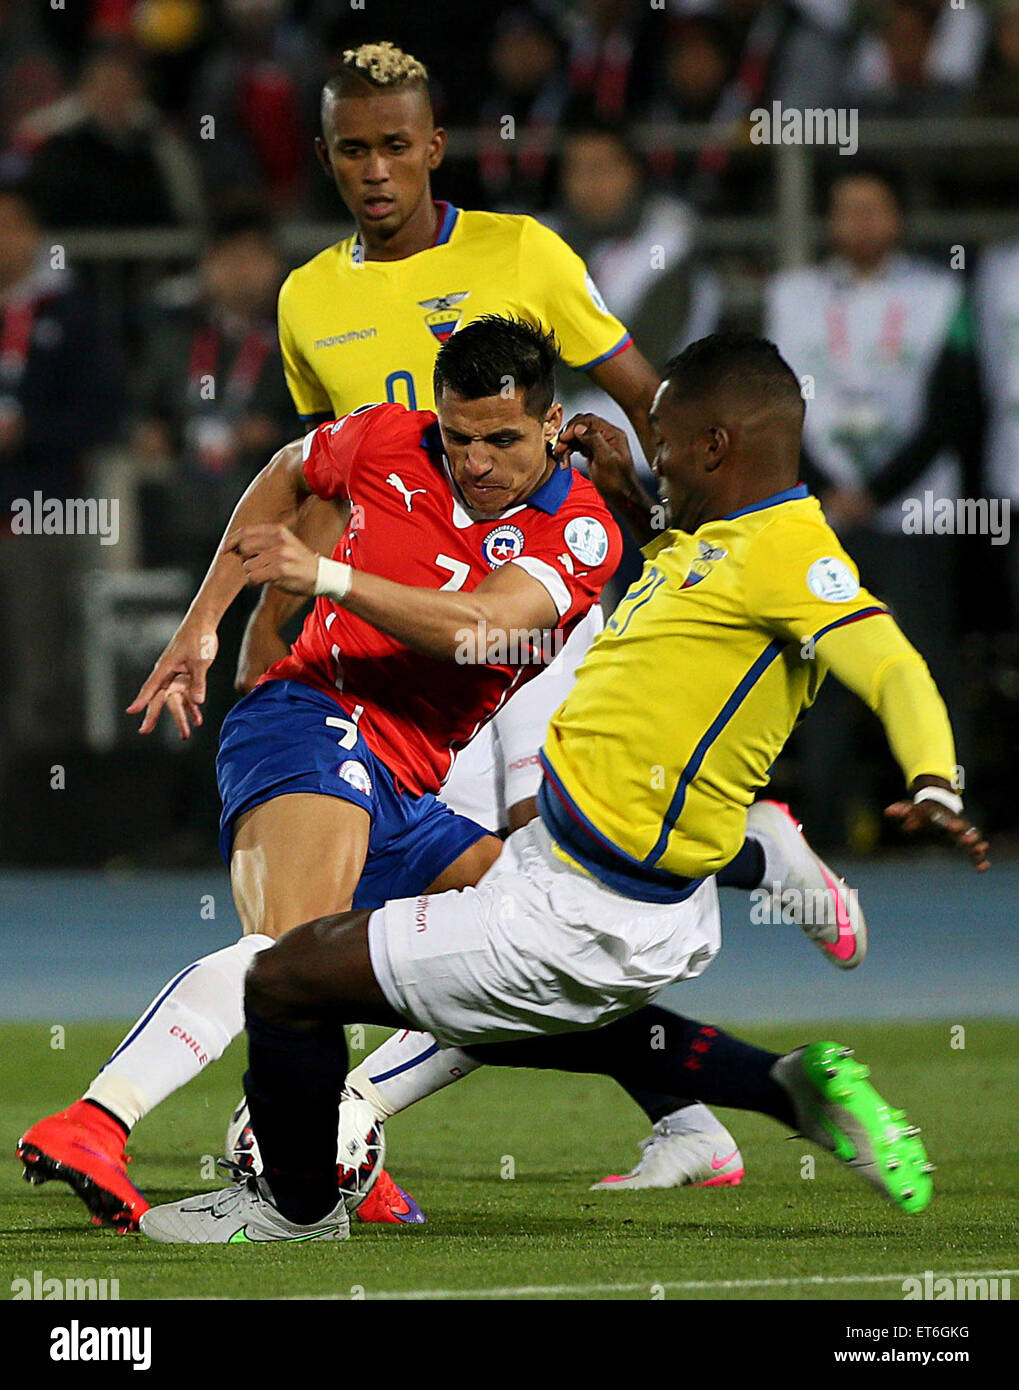 Santiago, Chile. 11th June, 2015. Alexis Sanchez (C) of Chile vies for the ball with Gabriel Achilier (R) from Ecuador during the opening match of the Copa America 2015, in Santiago, capital of Chile, on June 11, 2015. Credit:  TELAM/Xinhua/Alamy Live News Stock Photo